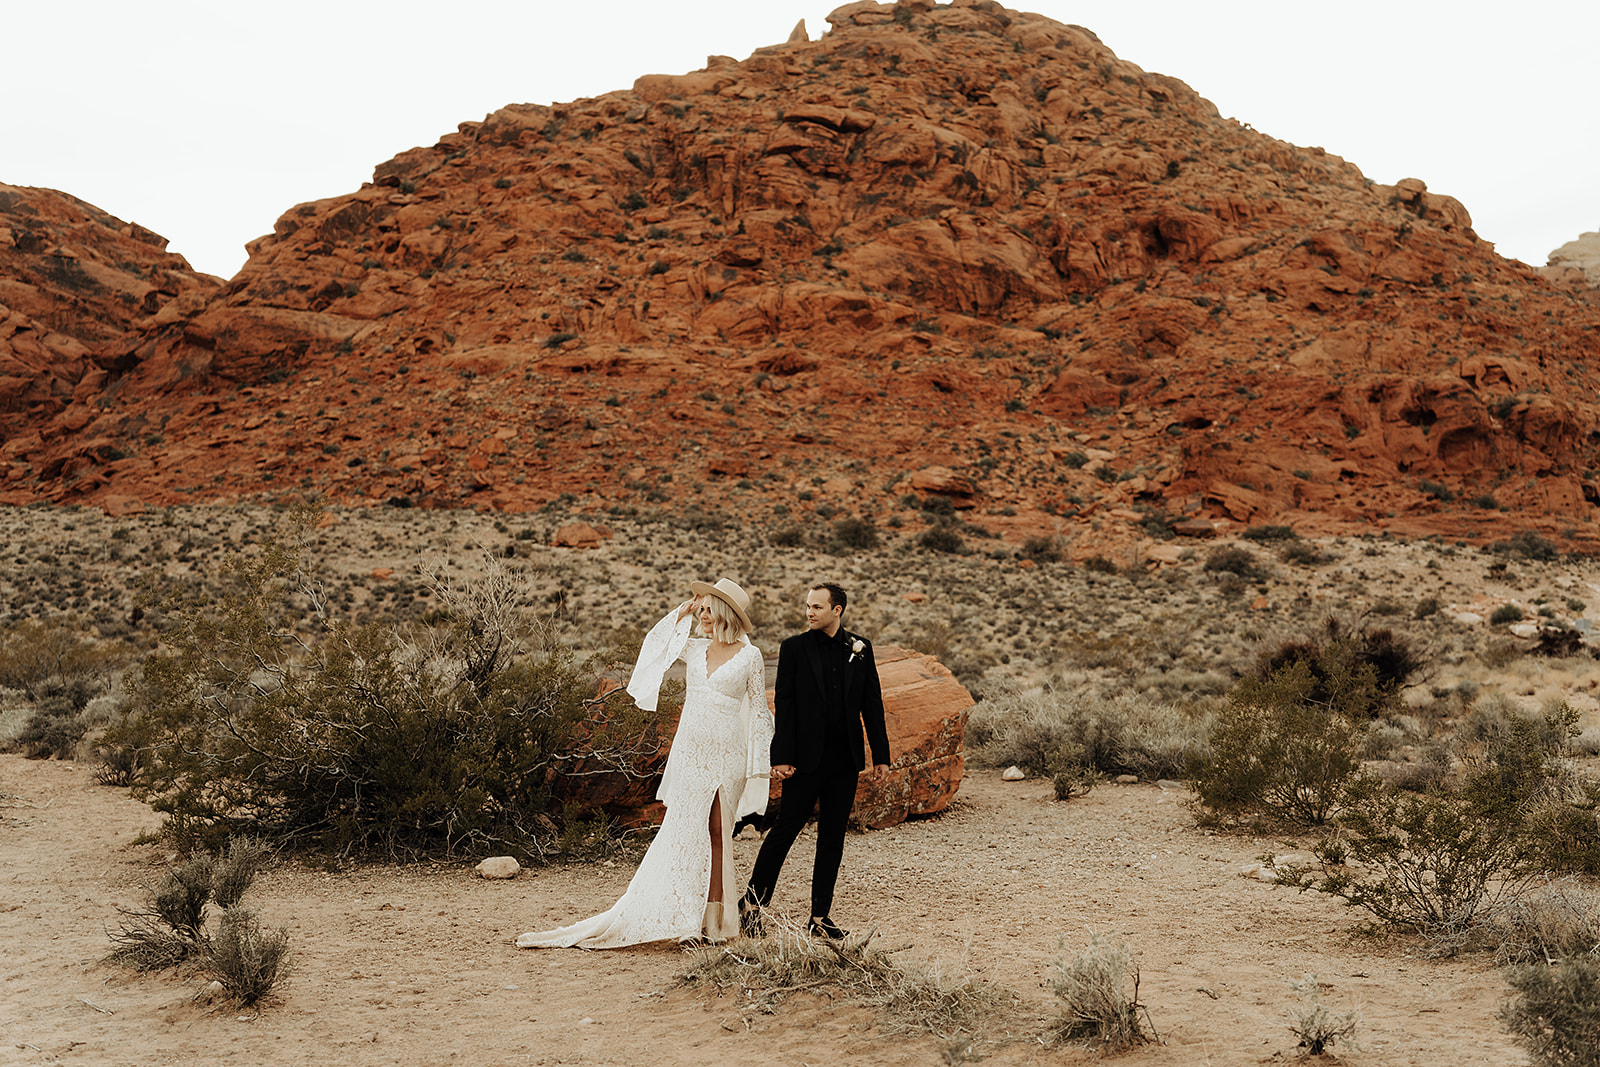 Couple posing during their elopement shoot at Red Rock Canyon arranged by Elopement Las Vegas